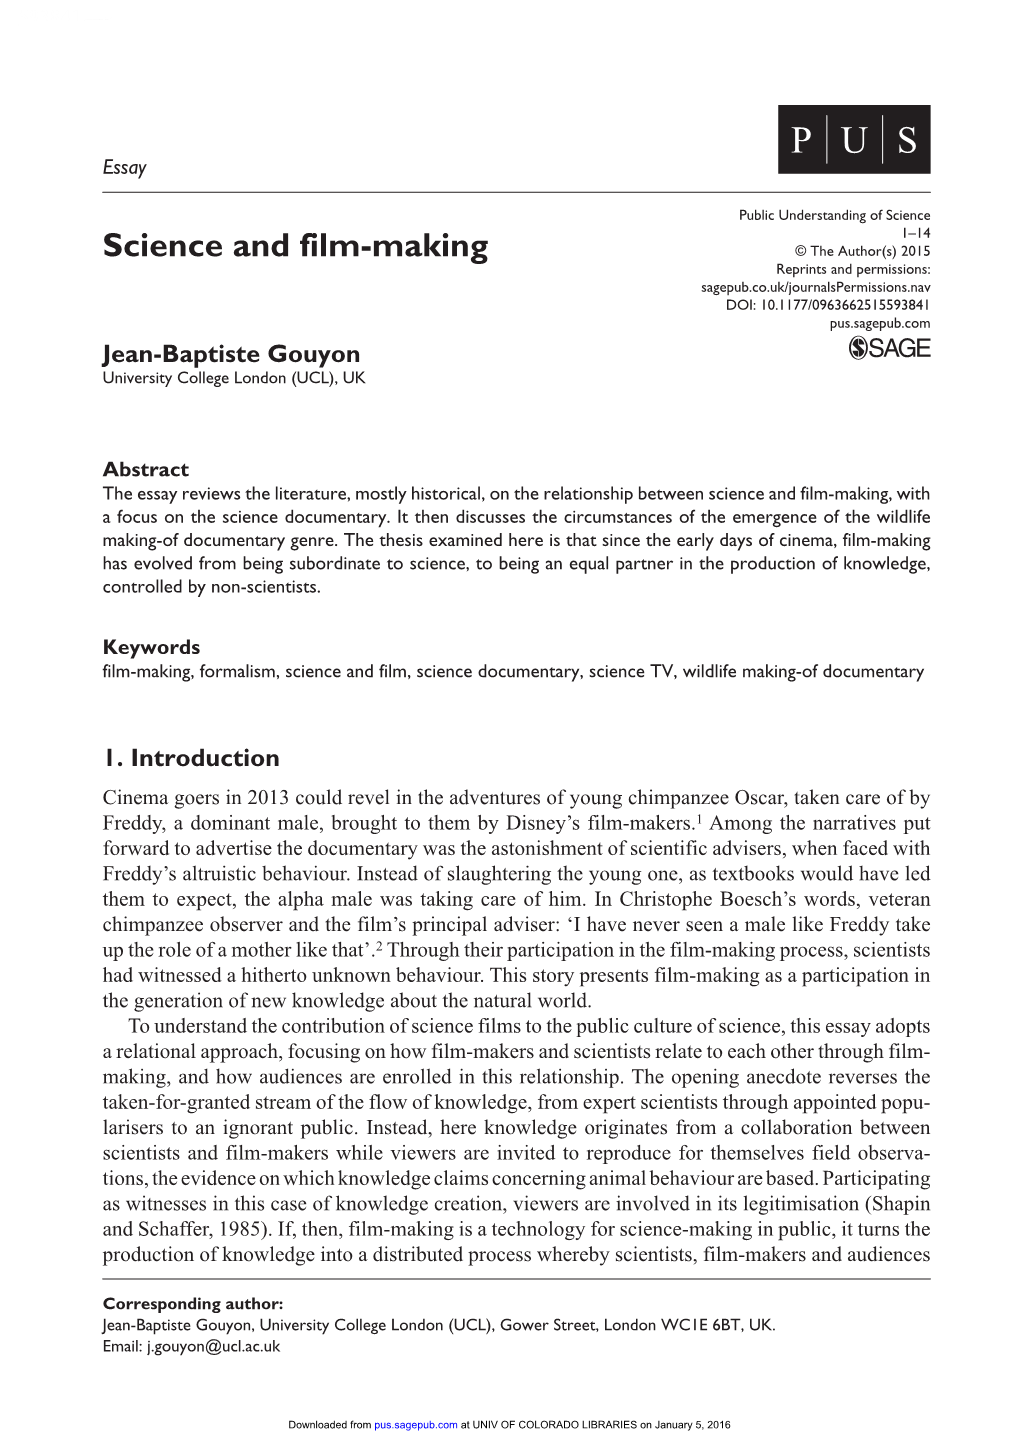 Science and Film-Making